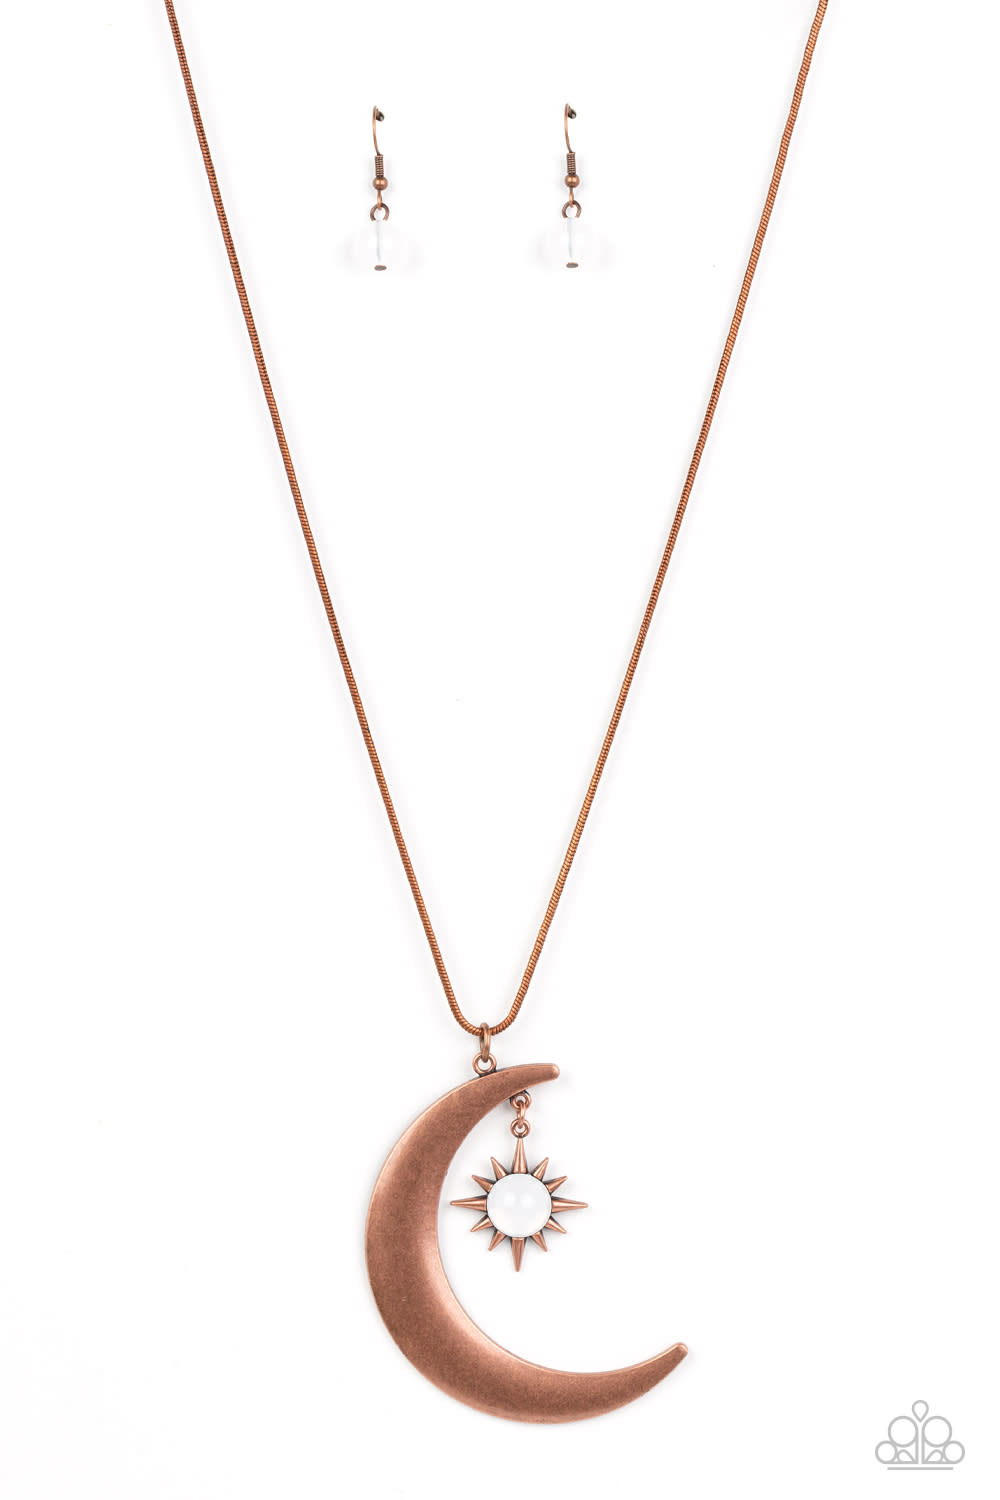 Astral Ascension Necklace (Gold, Copper, White)